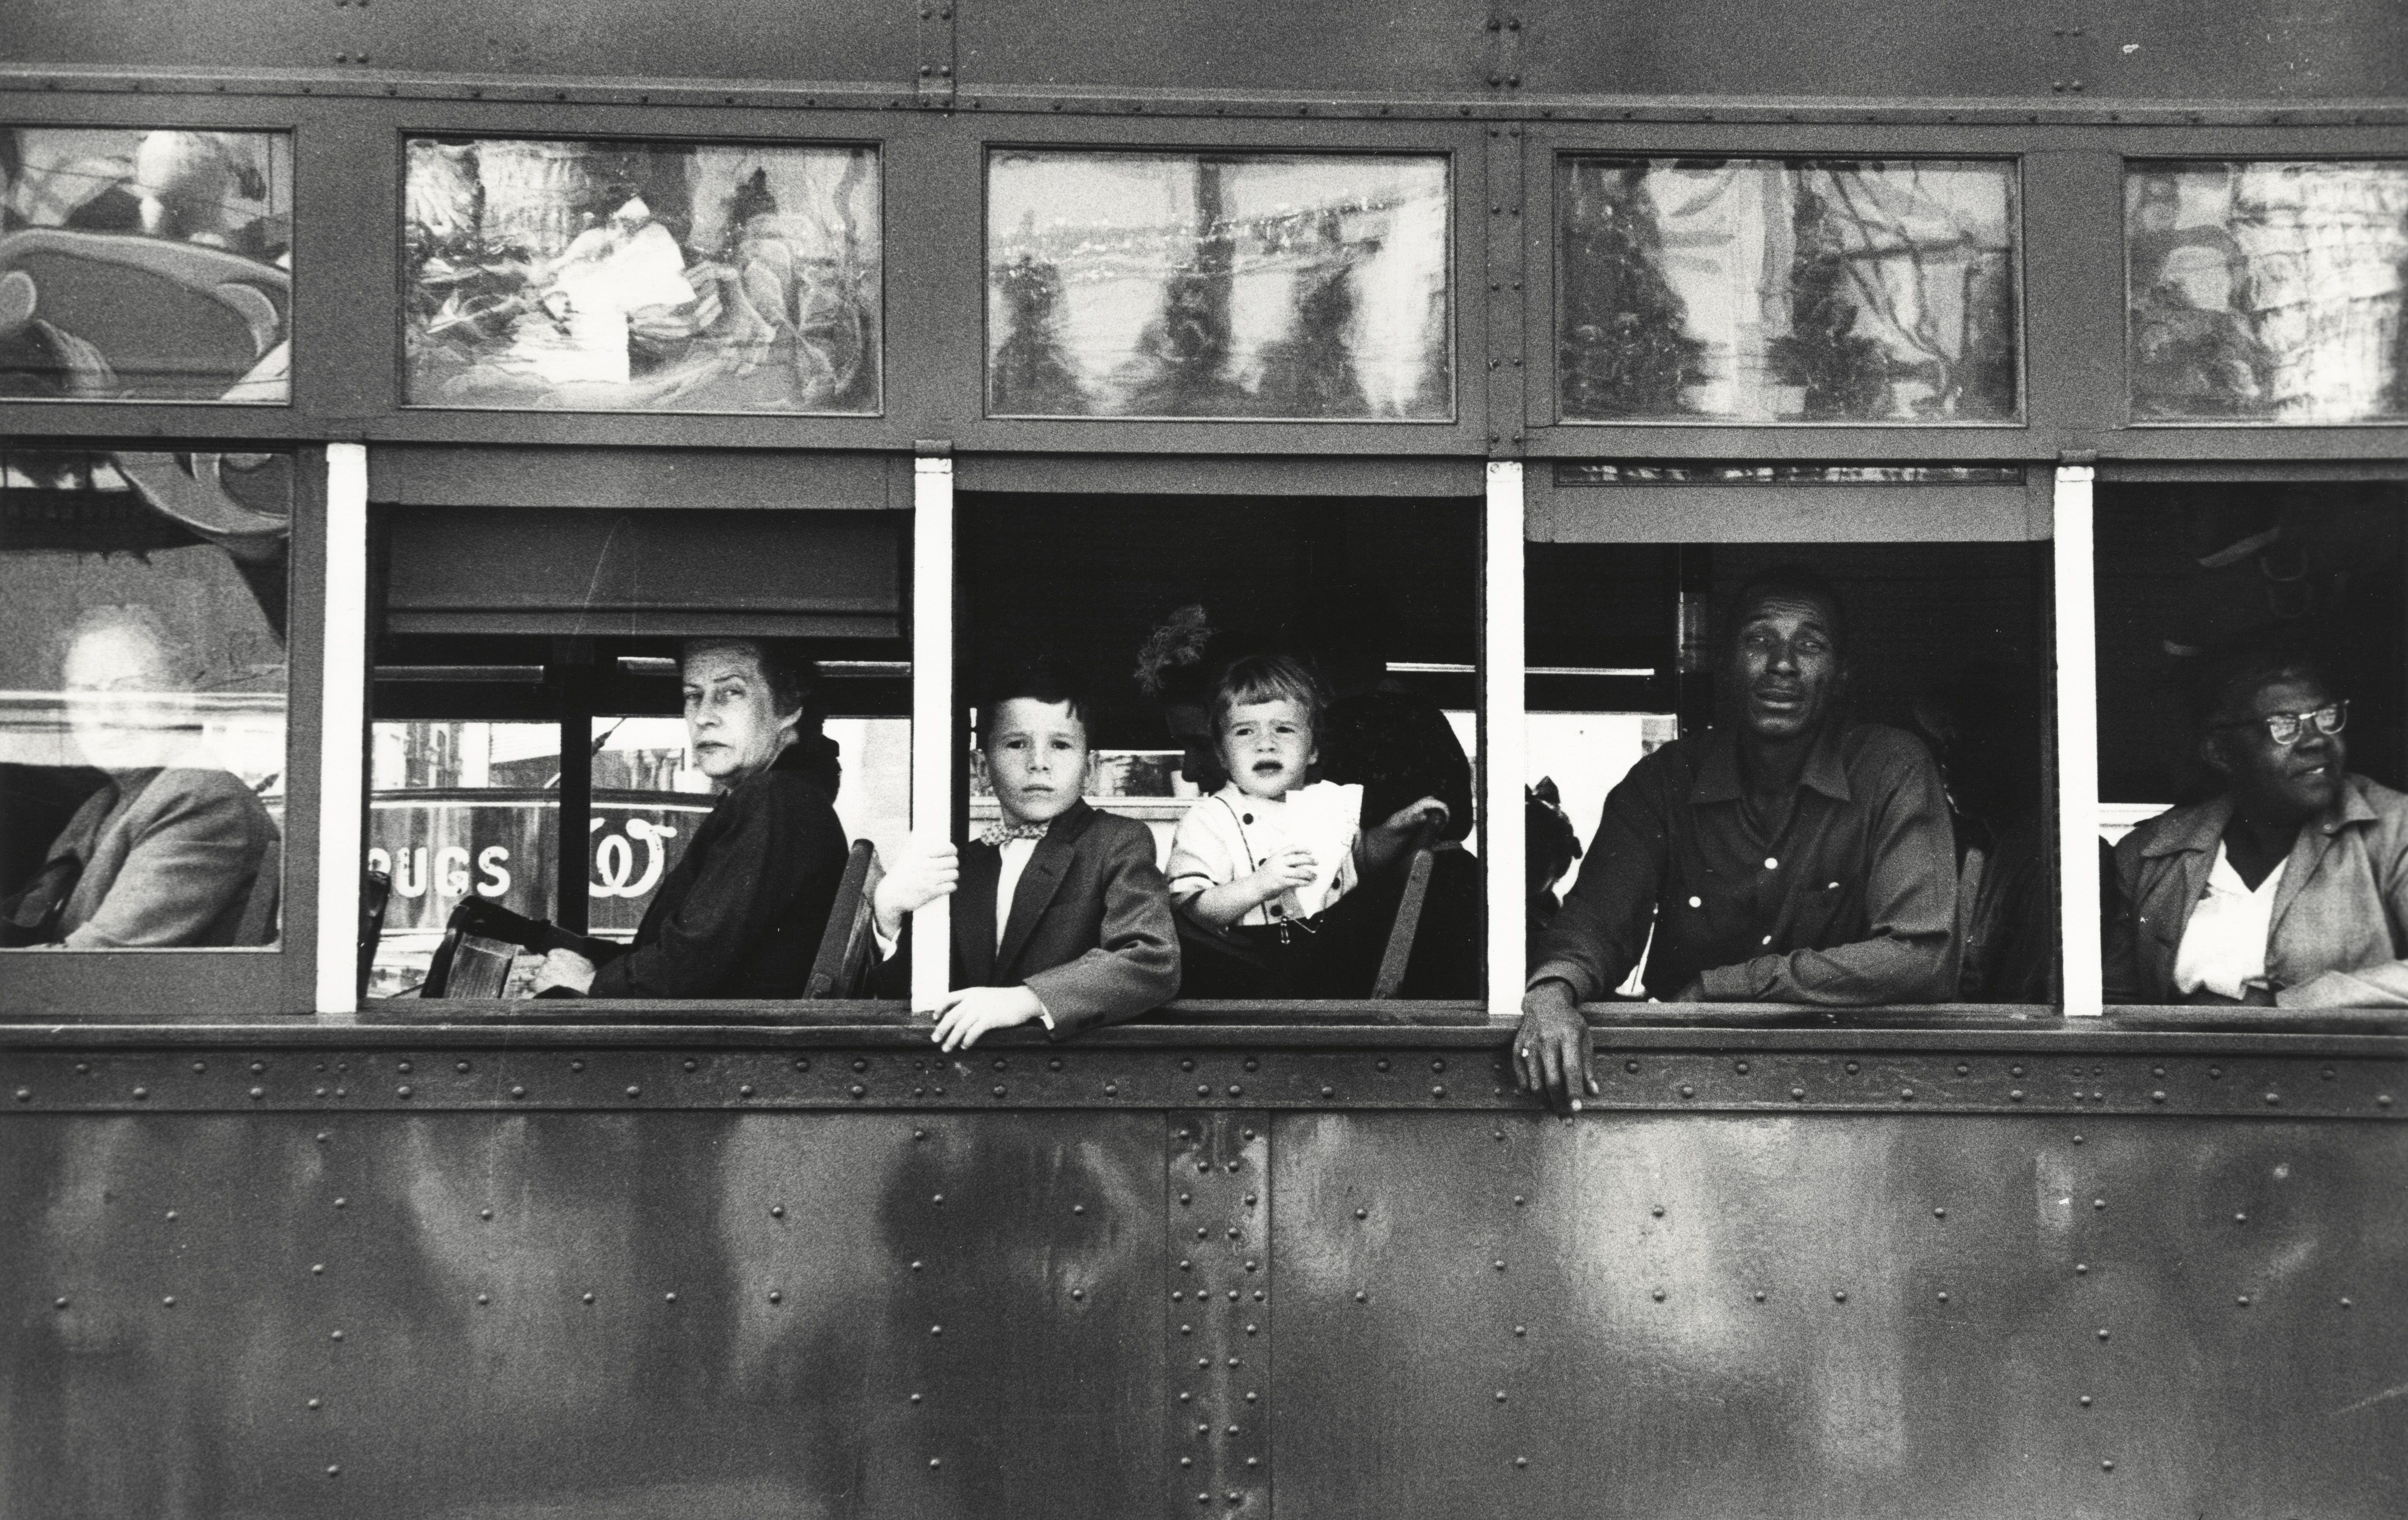 Robert Frank's seminal photo series 'The Americans' to be reissued 